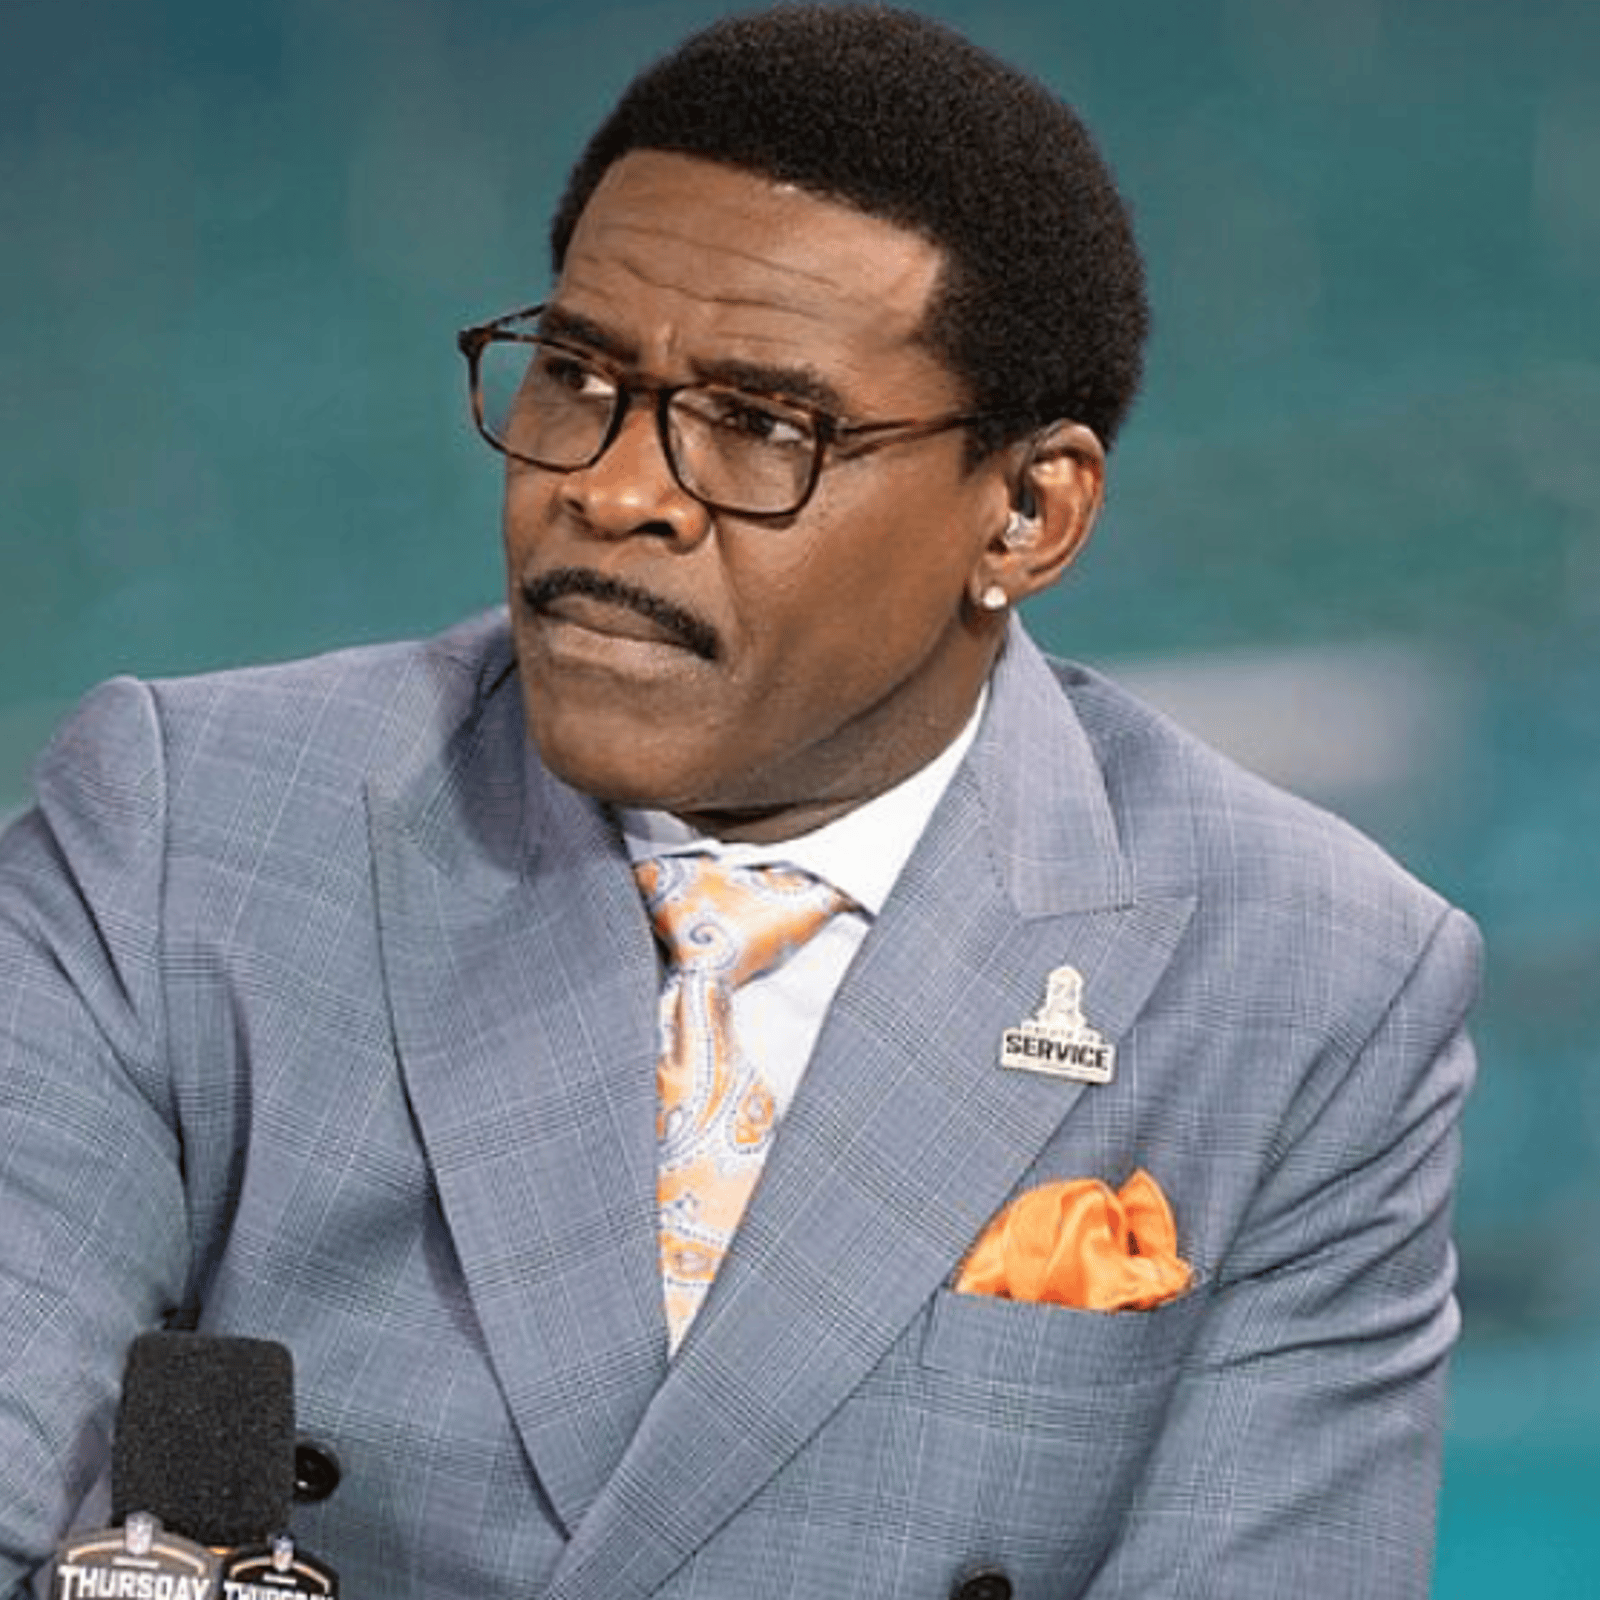 Awful announcement from Cowboys icon Michael Irvin